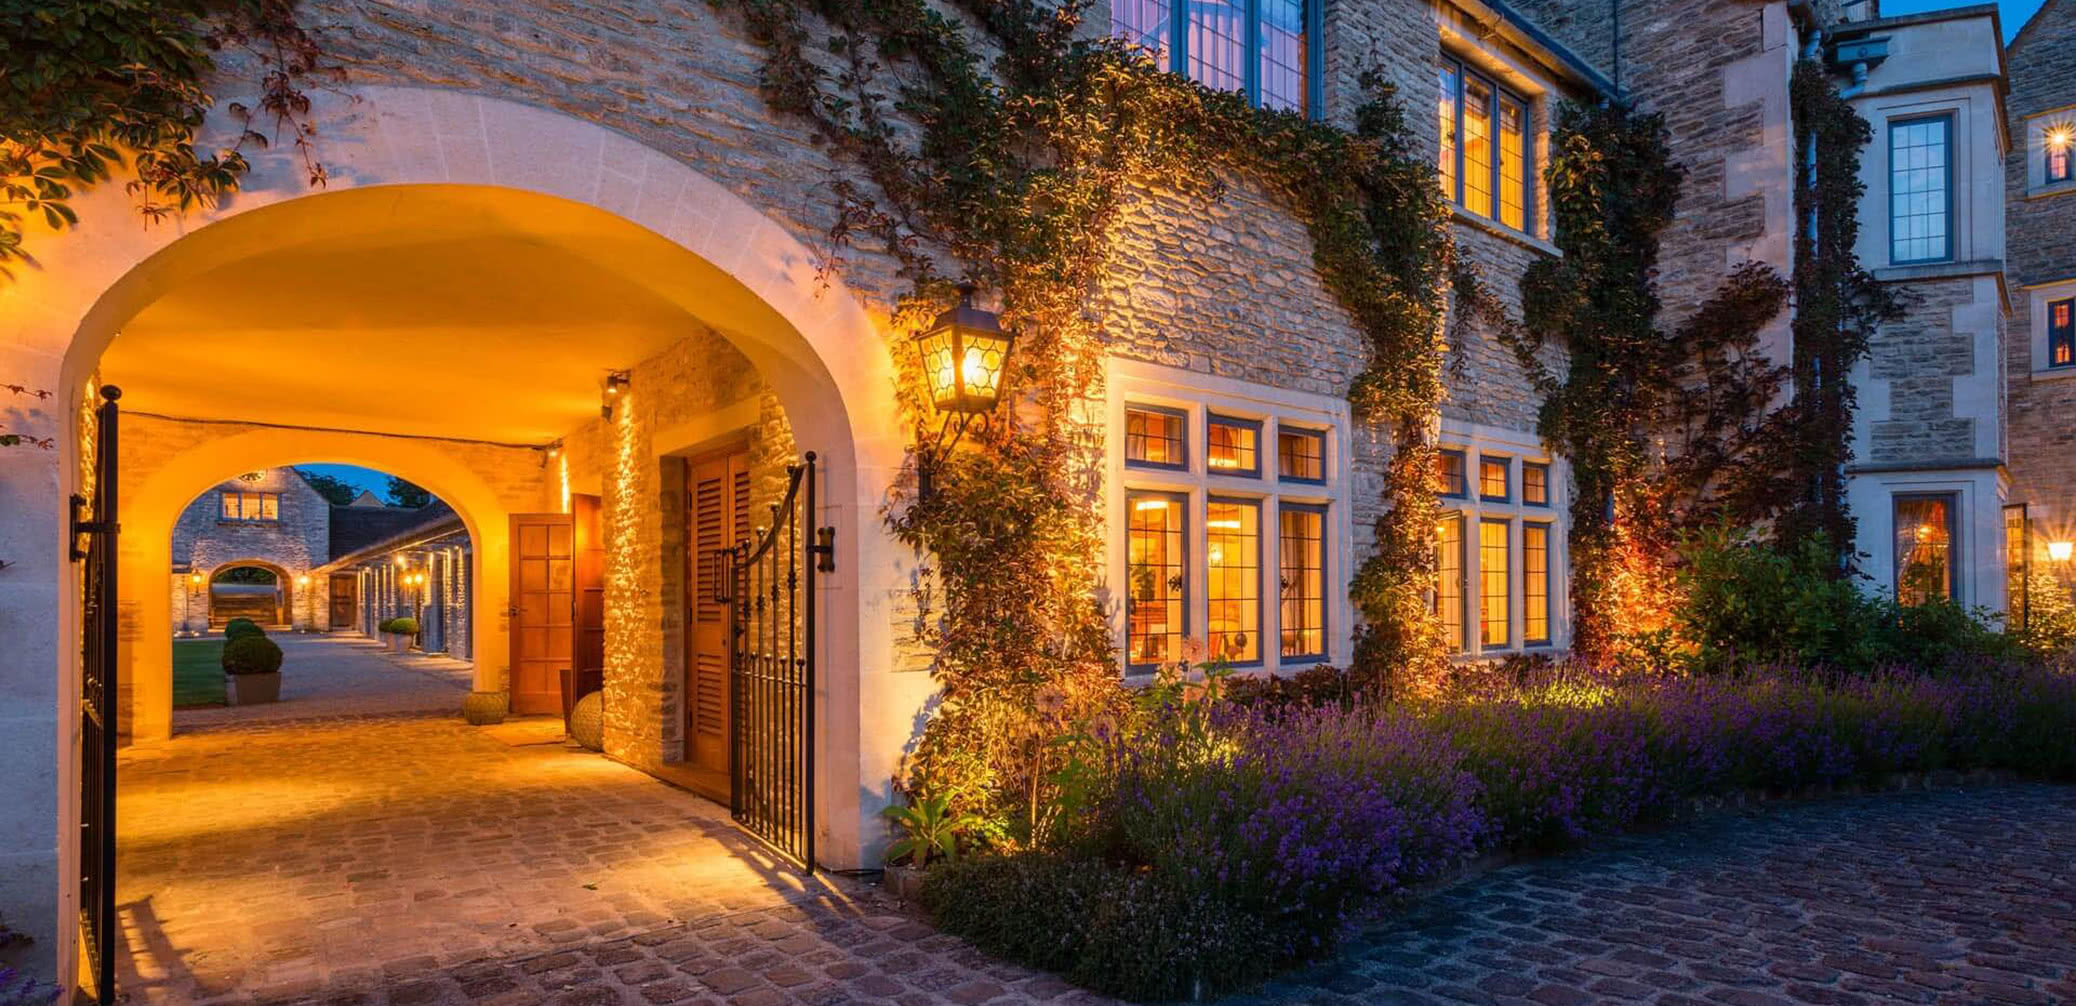 Top 5 Best Luxury Hotels and B&B’s In The Cotswolds